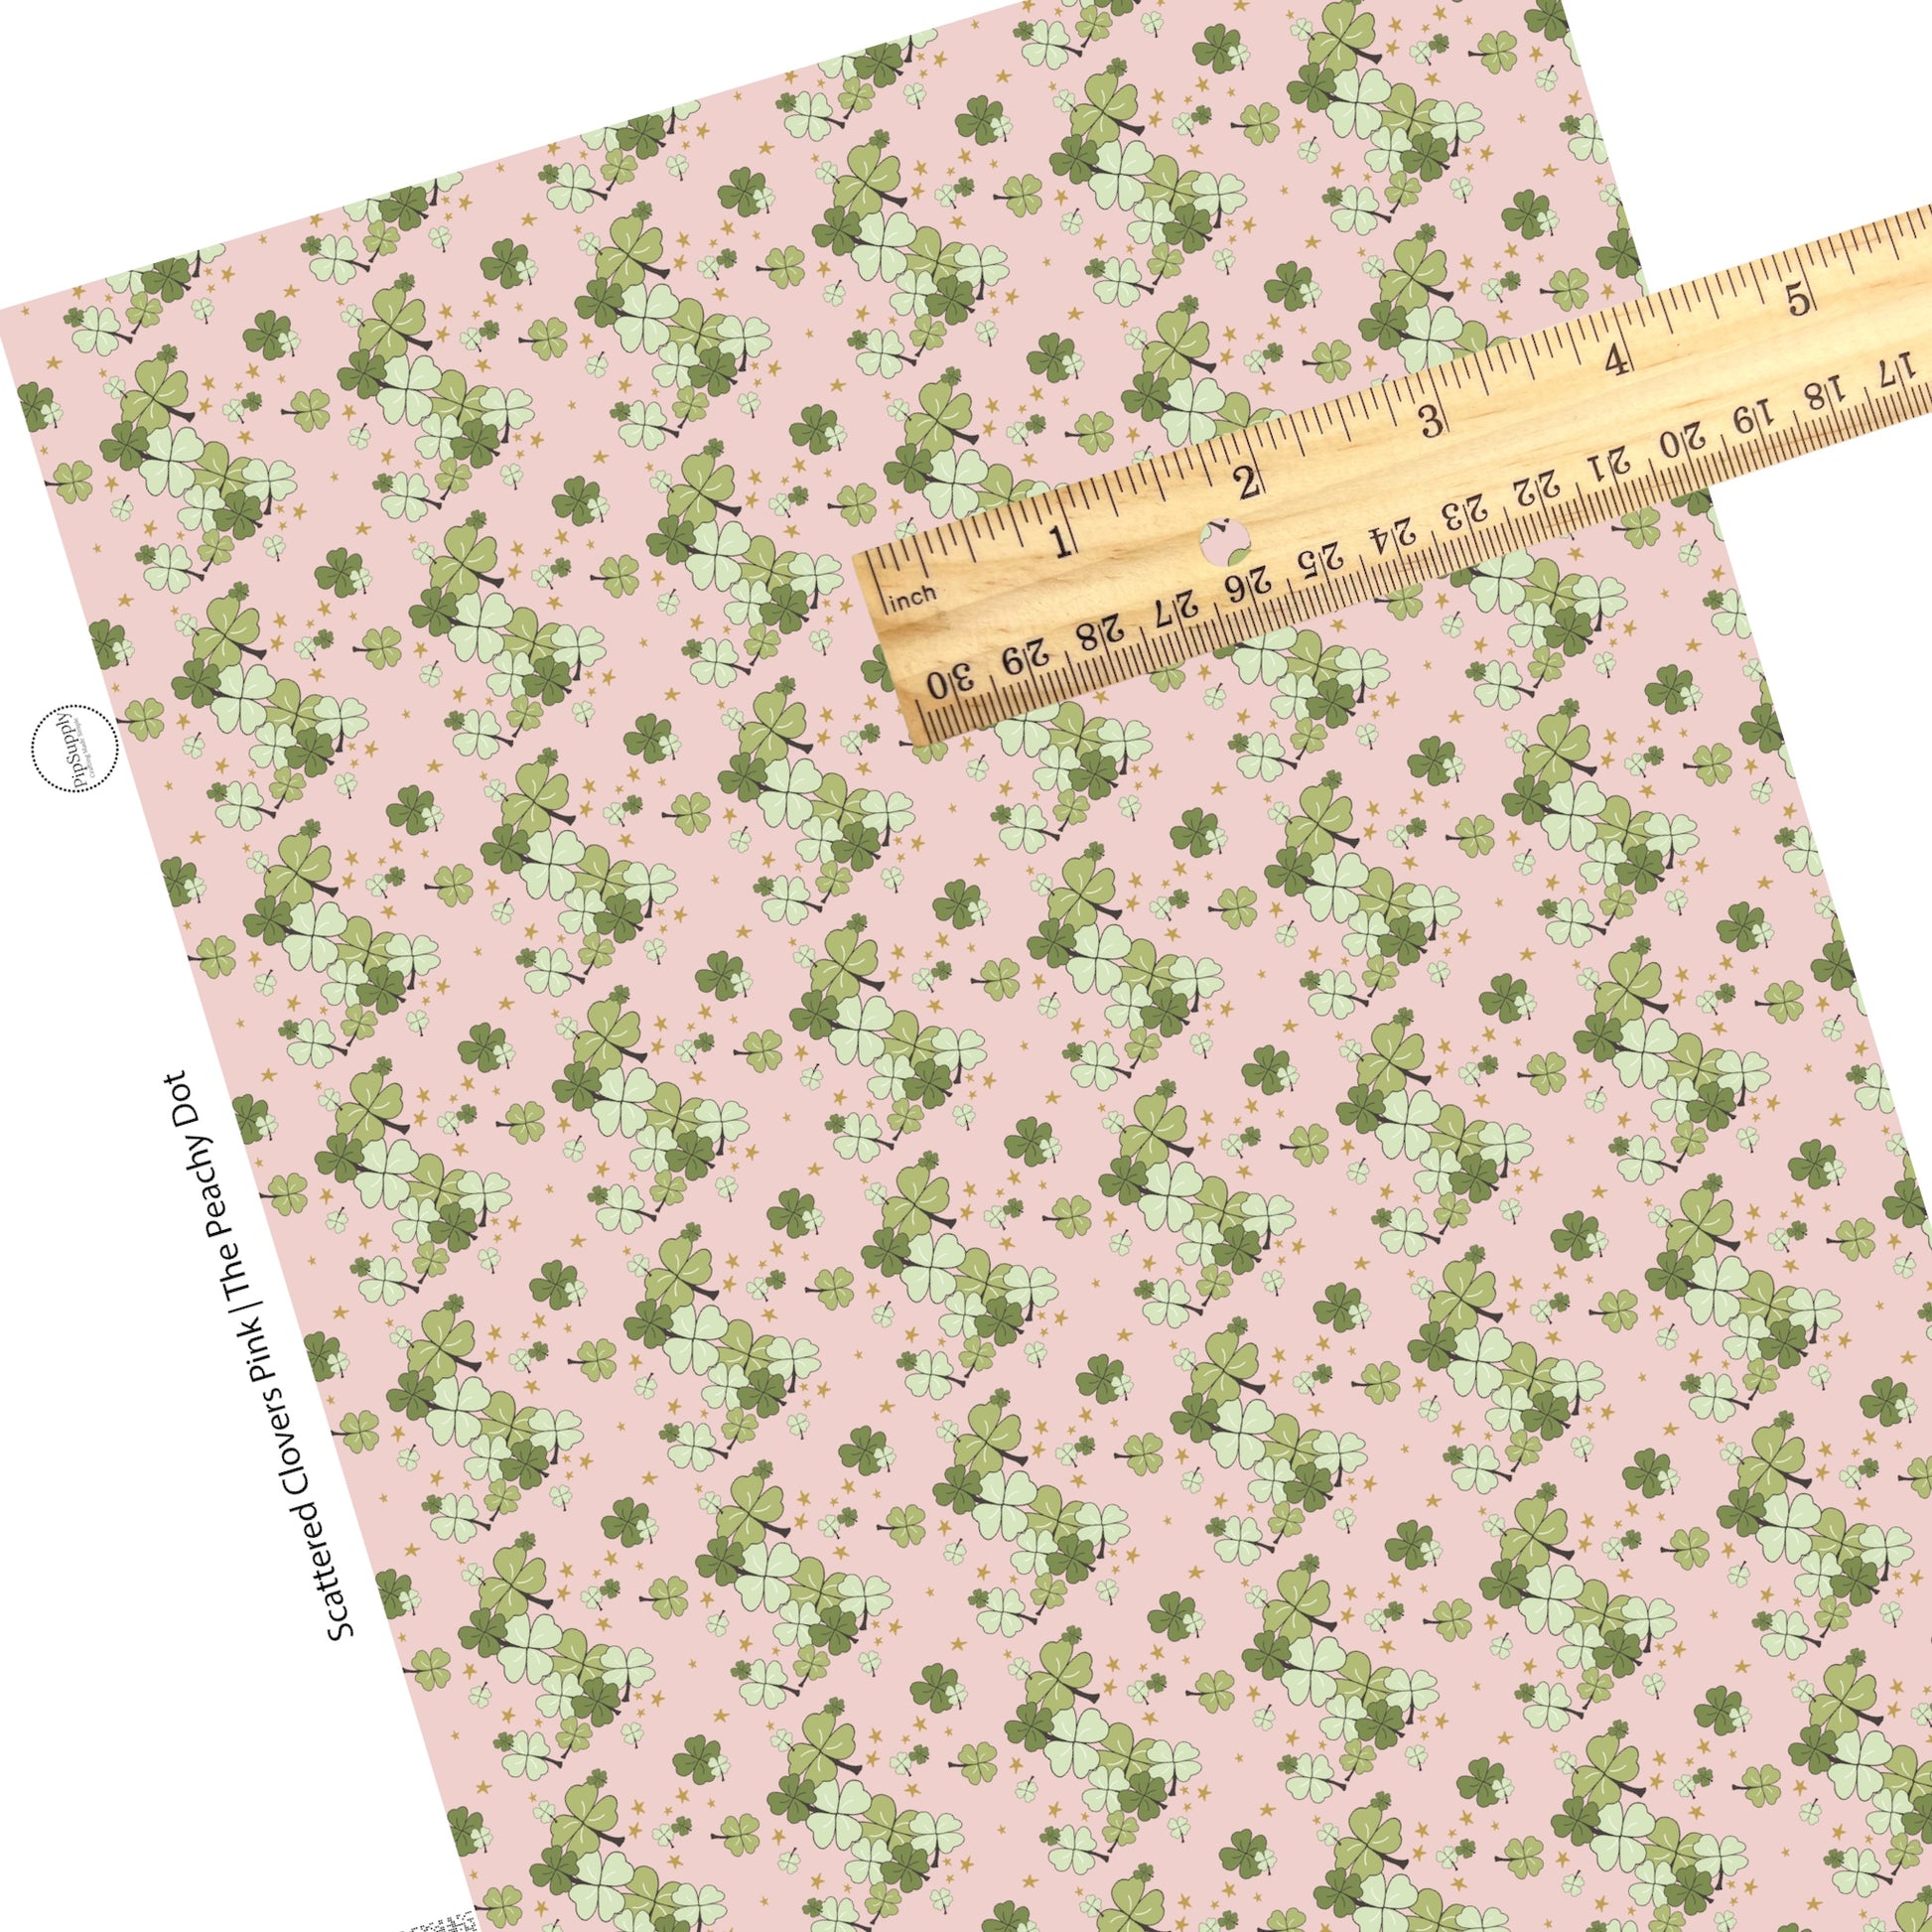 Scattered green and light green clovers on a light pink faux leather sheet